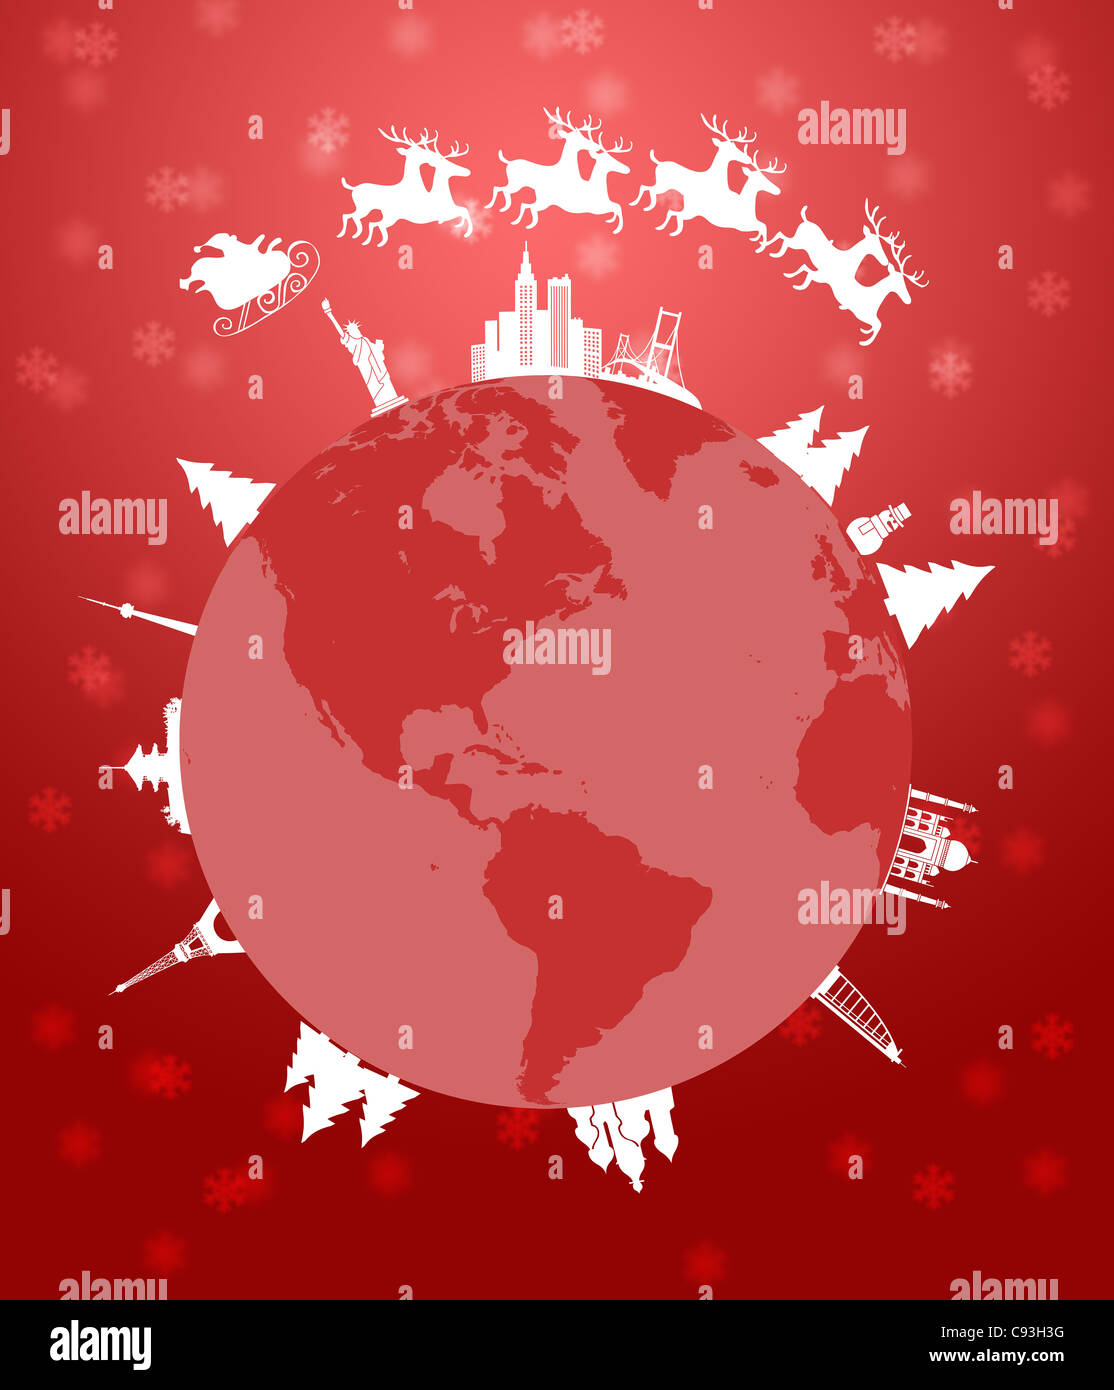 Santa Sleigh and Reindeer Flying Around the World Globe Red Background Illustration Stock Photo